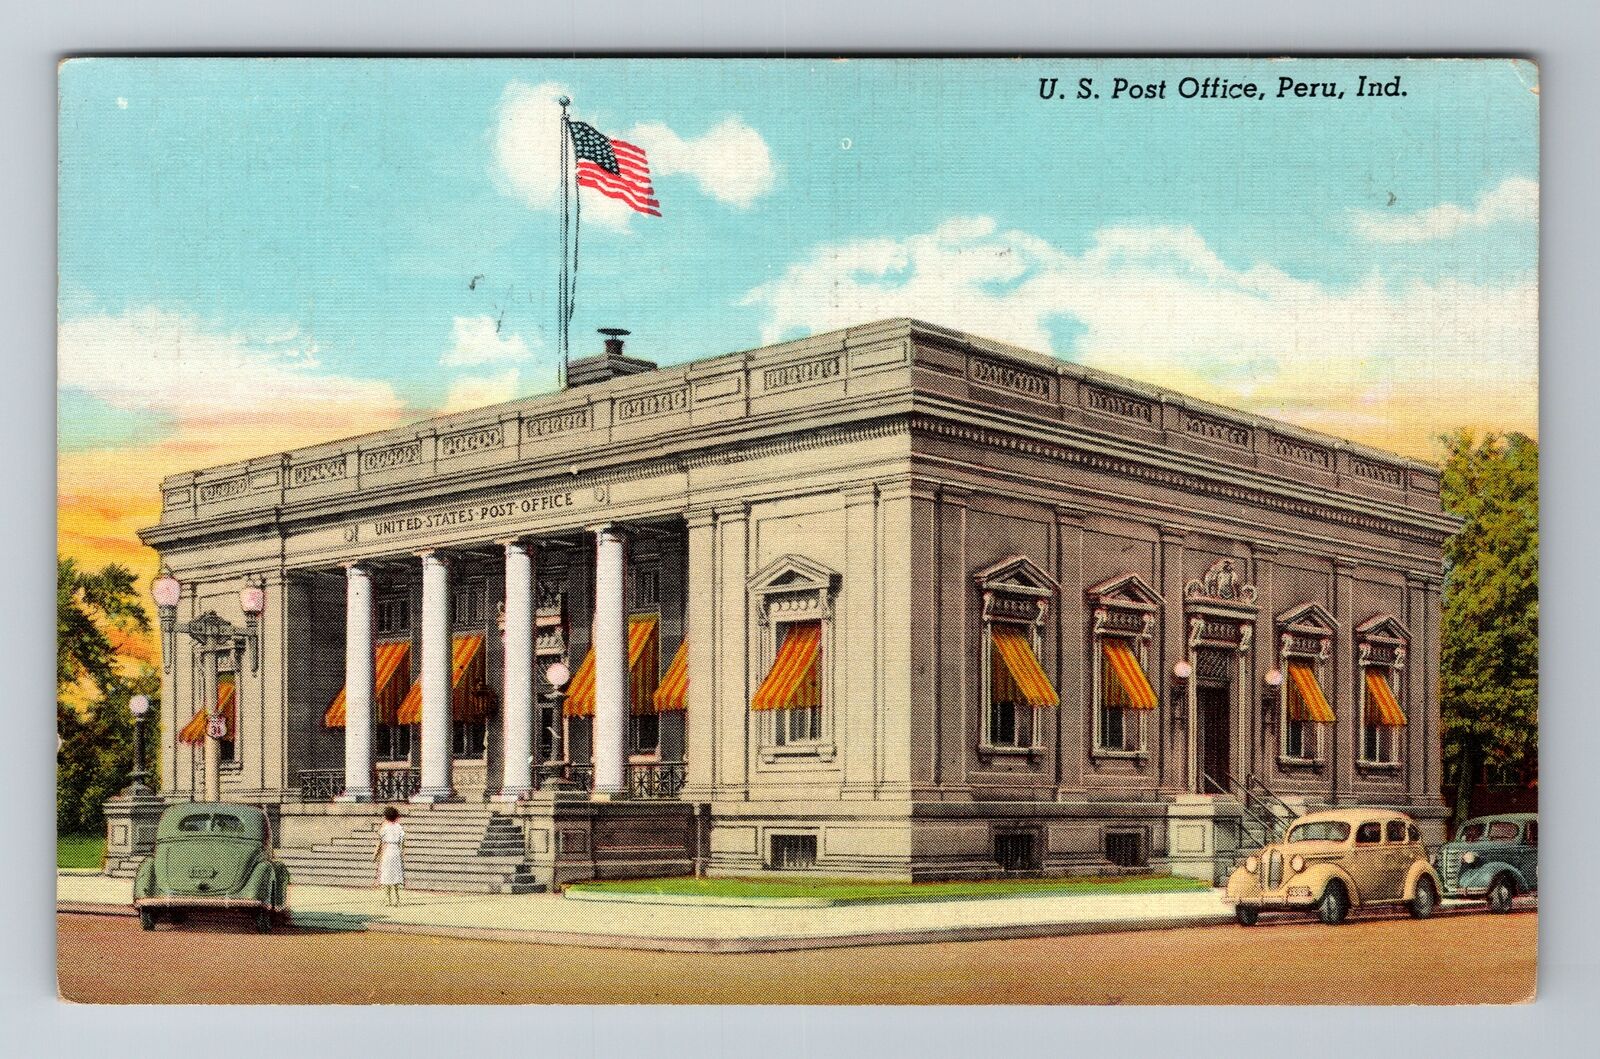 Peru IN-Indiana, United States Post Office, Antique, Vintage c1946 Postcard